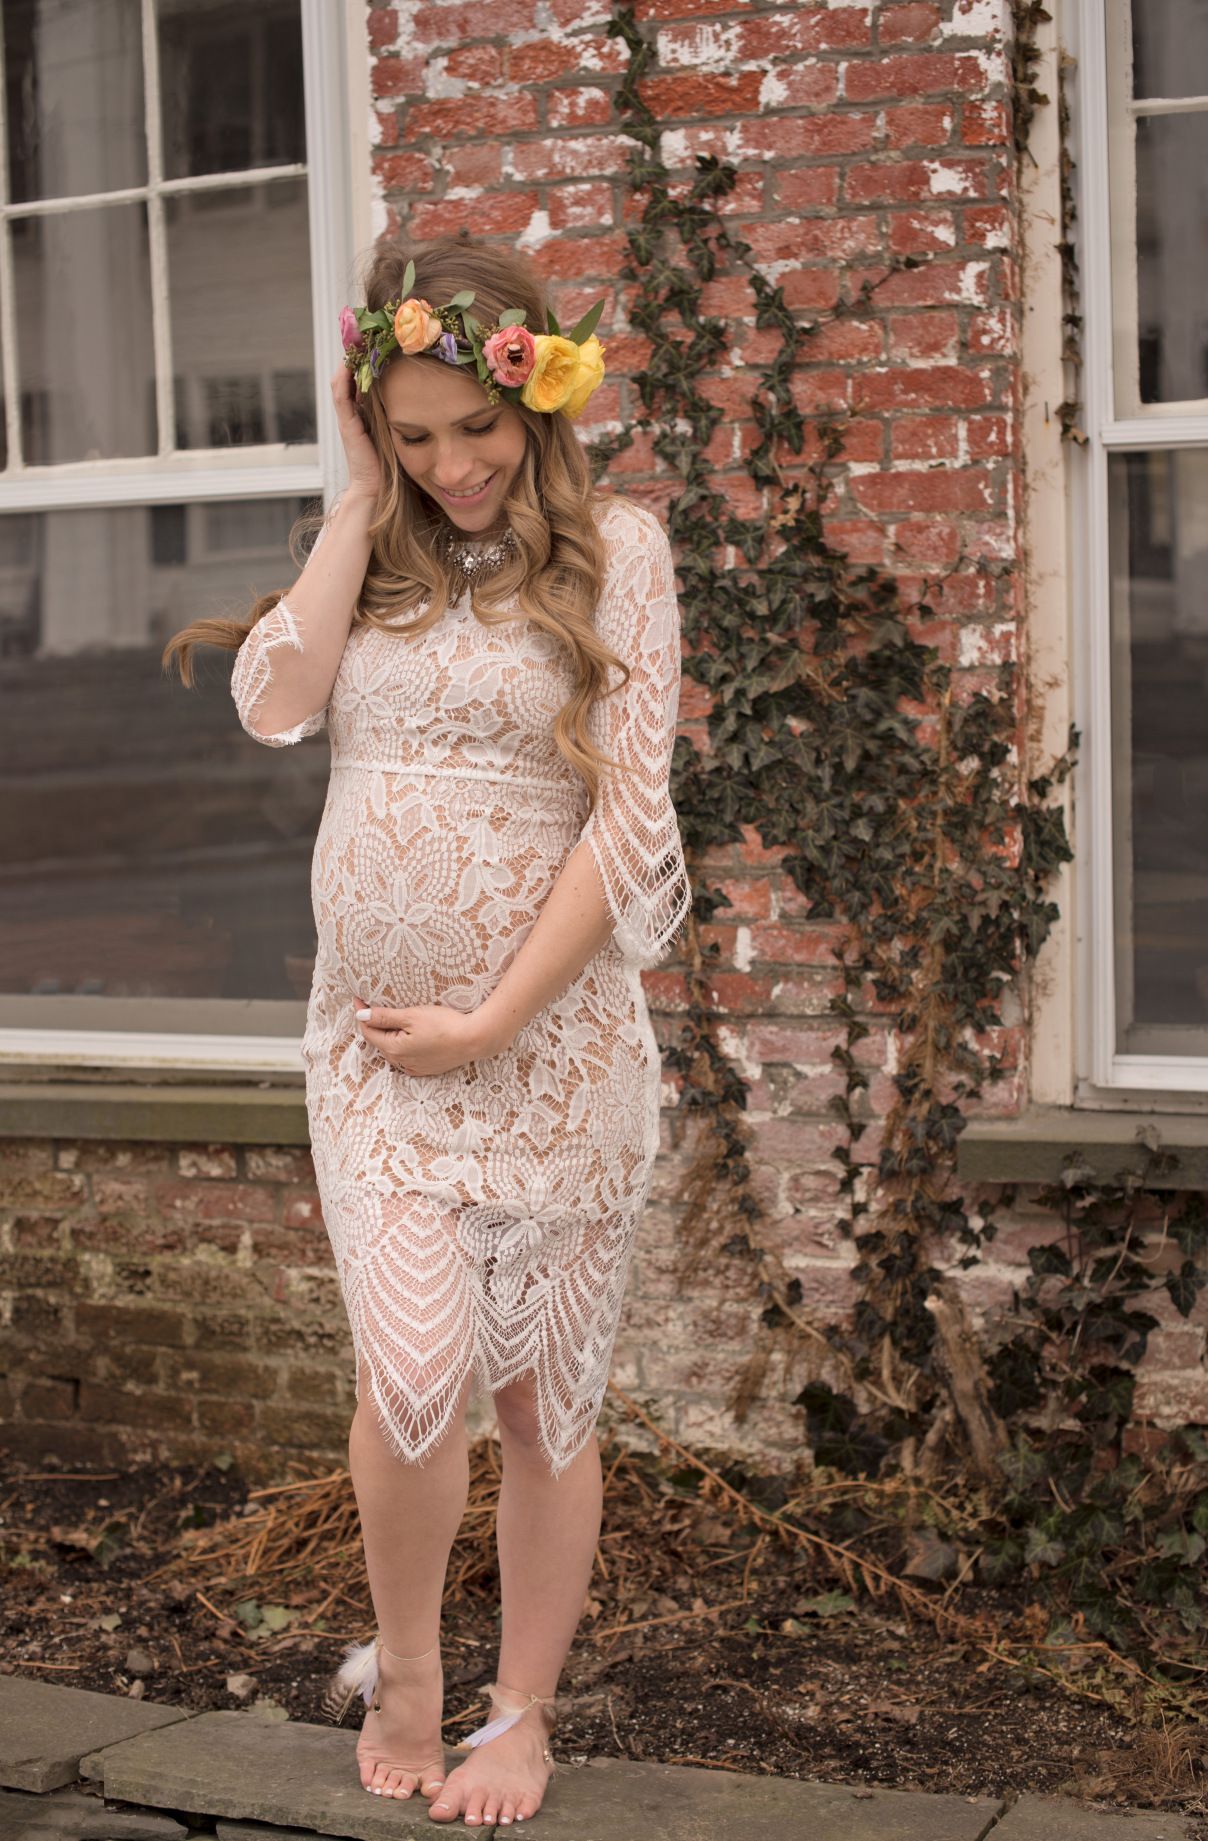 Full Size of Baby Shower:baby Shower Dresses Indian Maternity Maxi Dress Cheap Maternity Dresses For Baby Showers Trendy Maternity Clothes Baby Shower Dresses Cute Inexpensive Maternity Clothes Maternity Evening Gowns Plus Size Maternity Dresses For Baby Shower